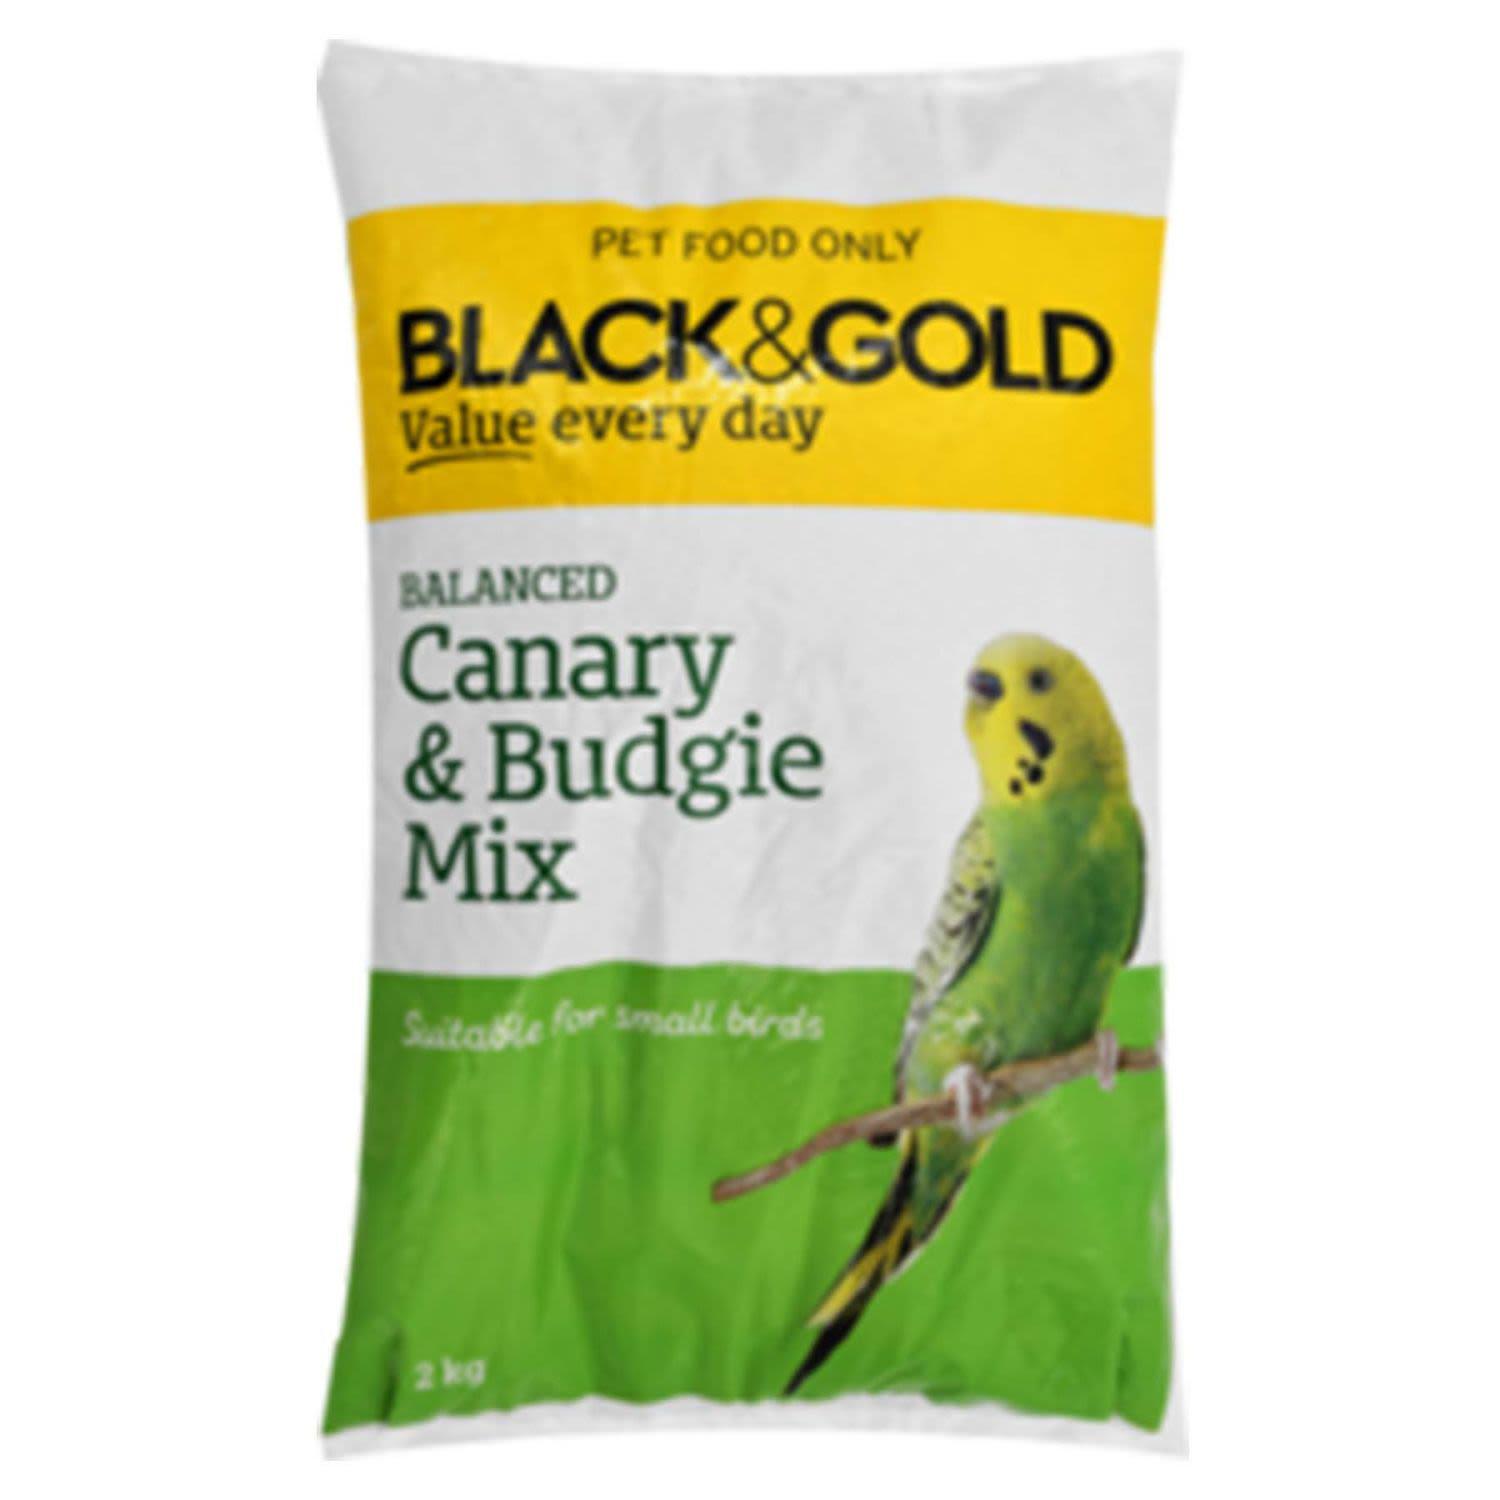 Black & Gold Budgie & Canary Bird Seed Mix 2kg